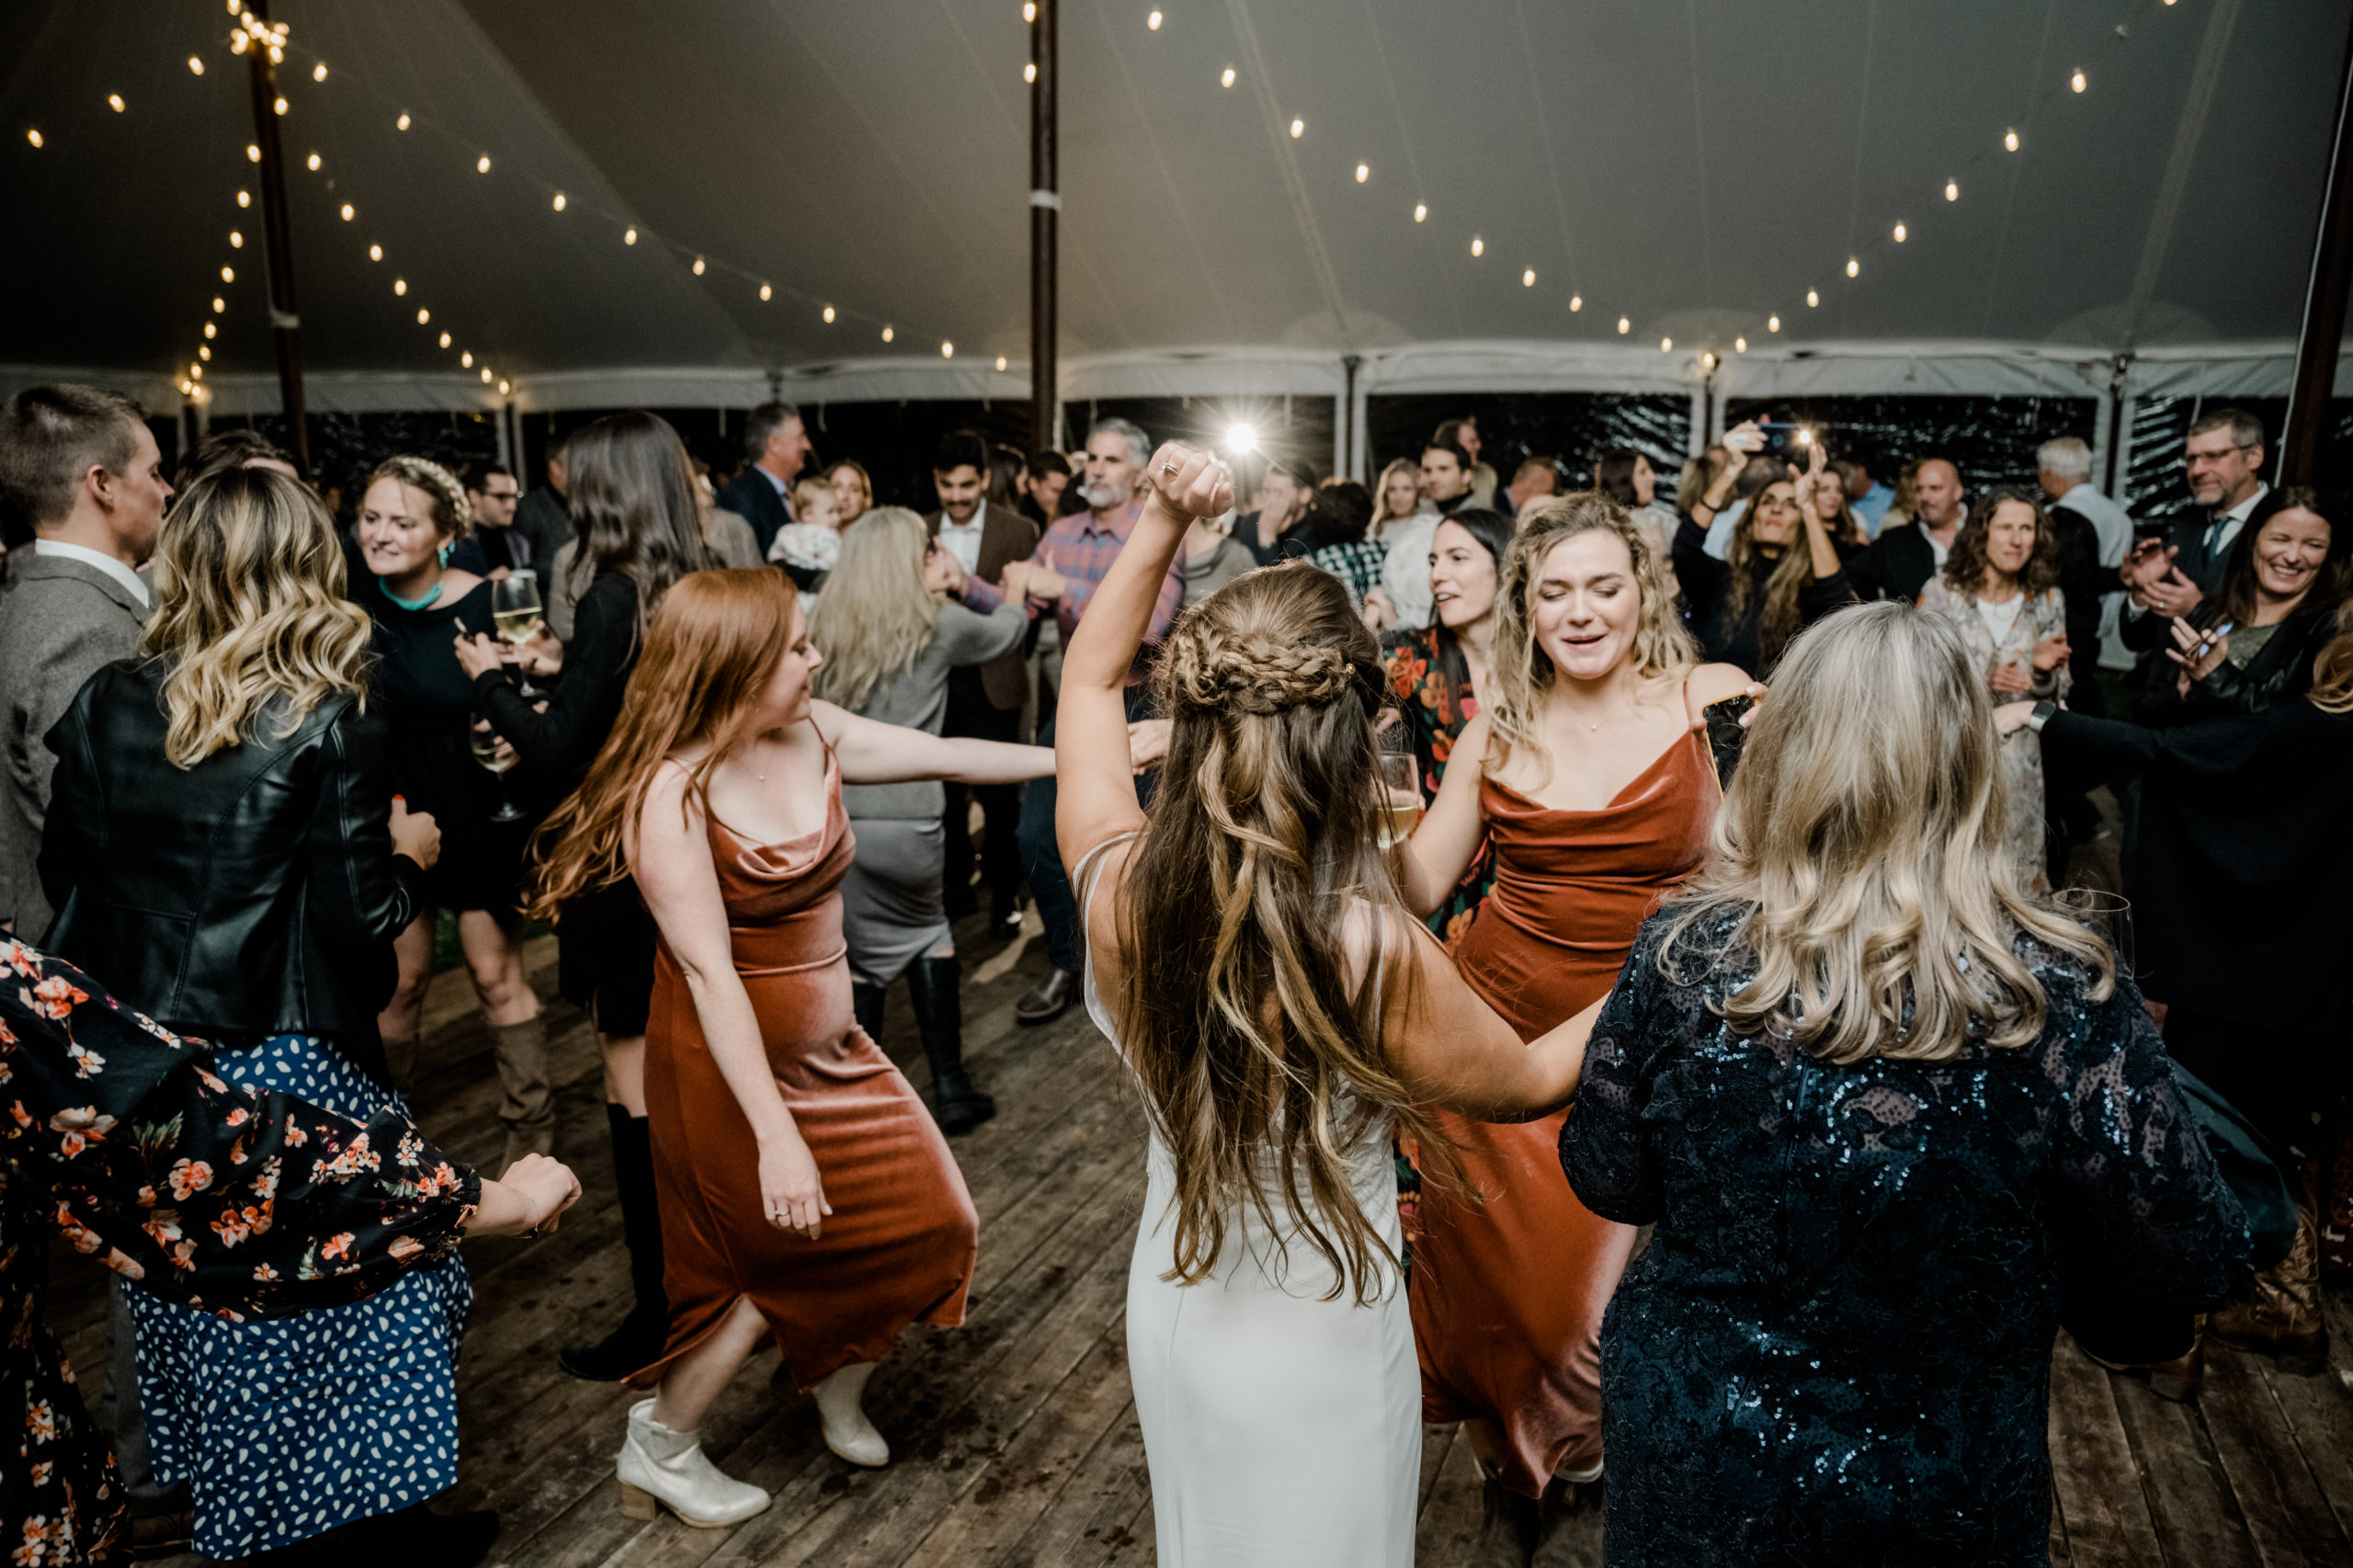 Bride and her bridesmaids dancing together on the dance floor.